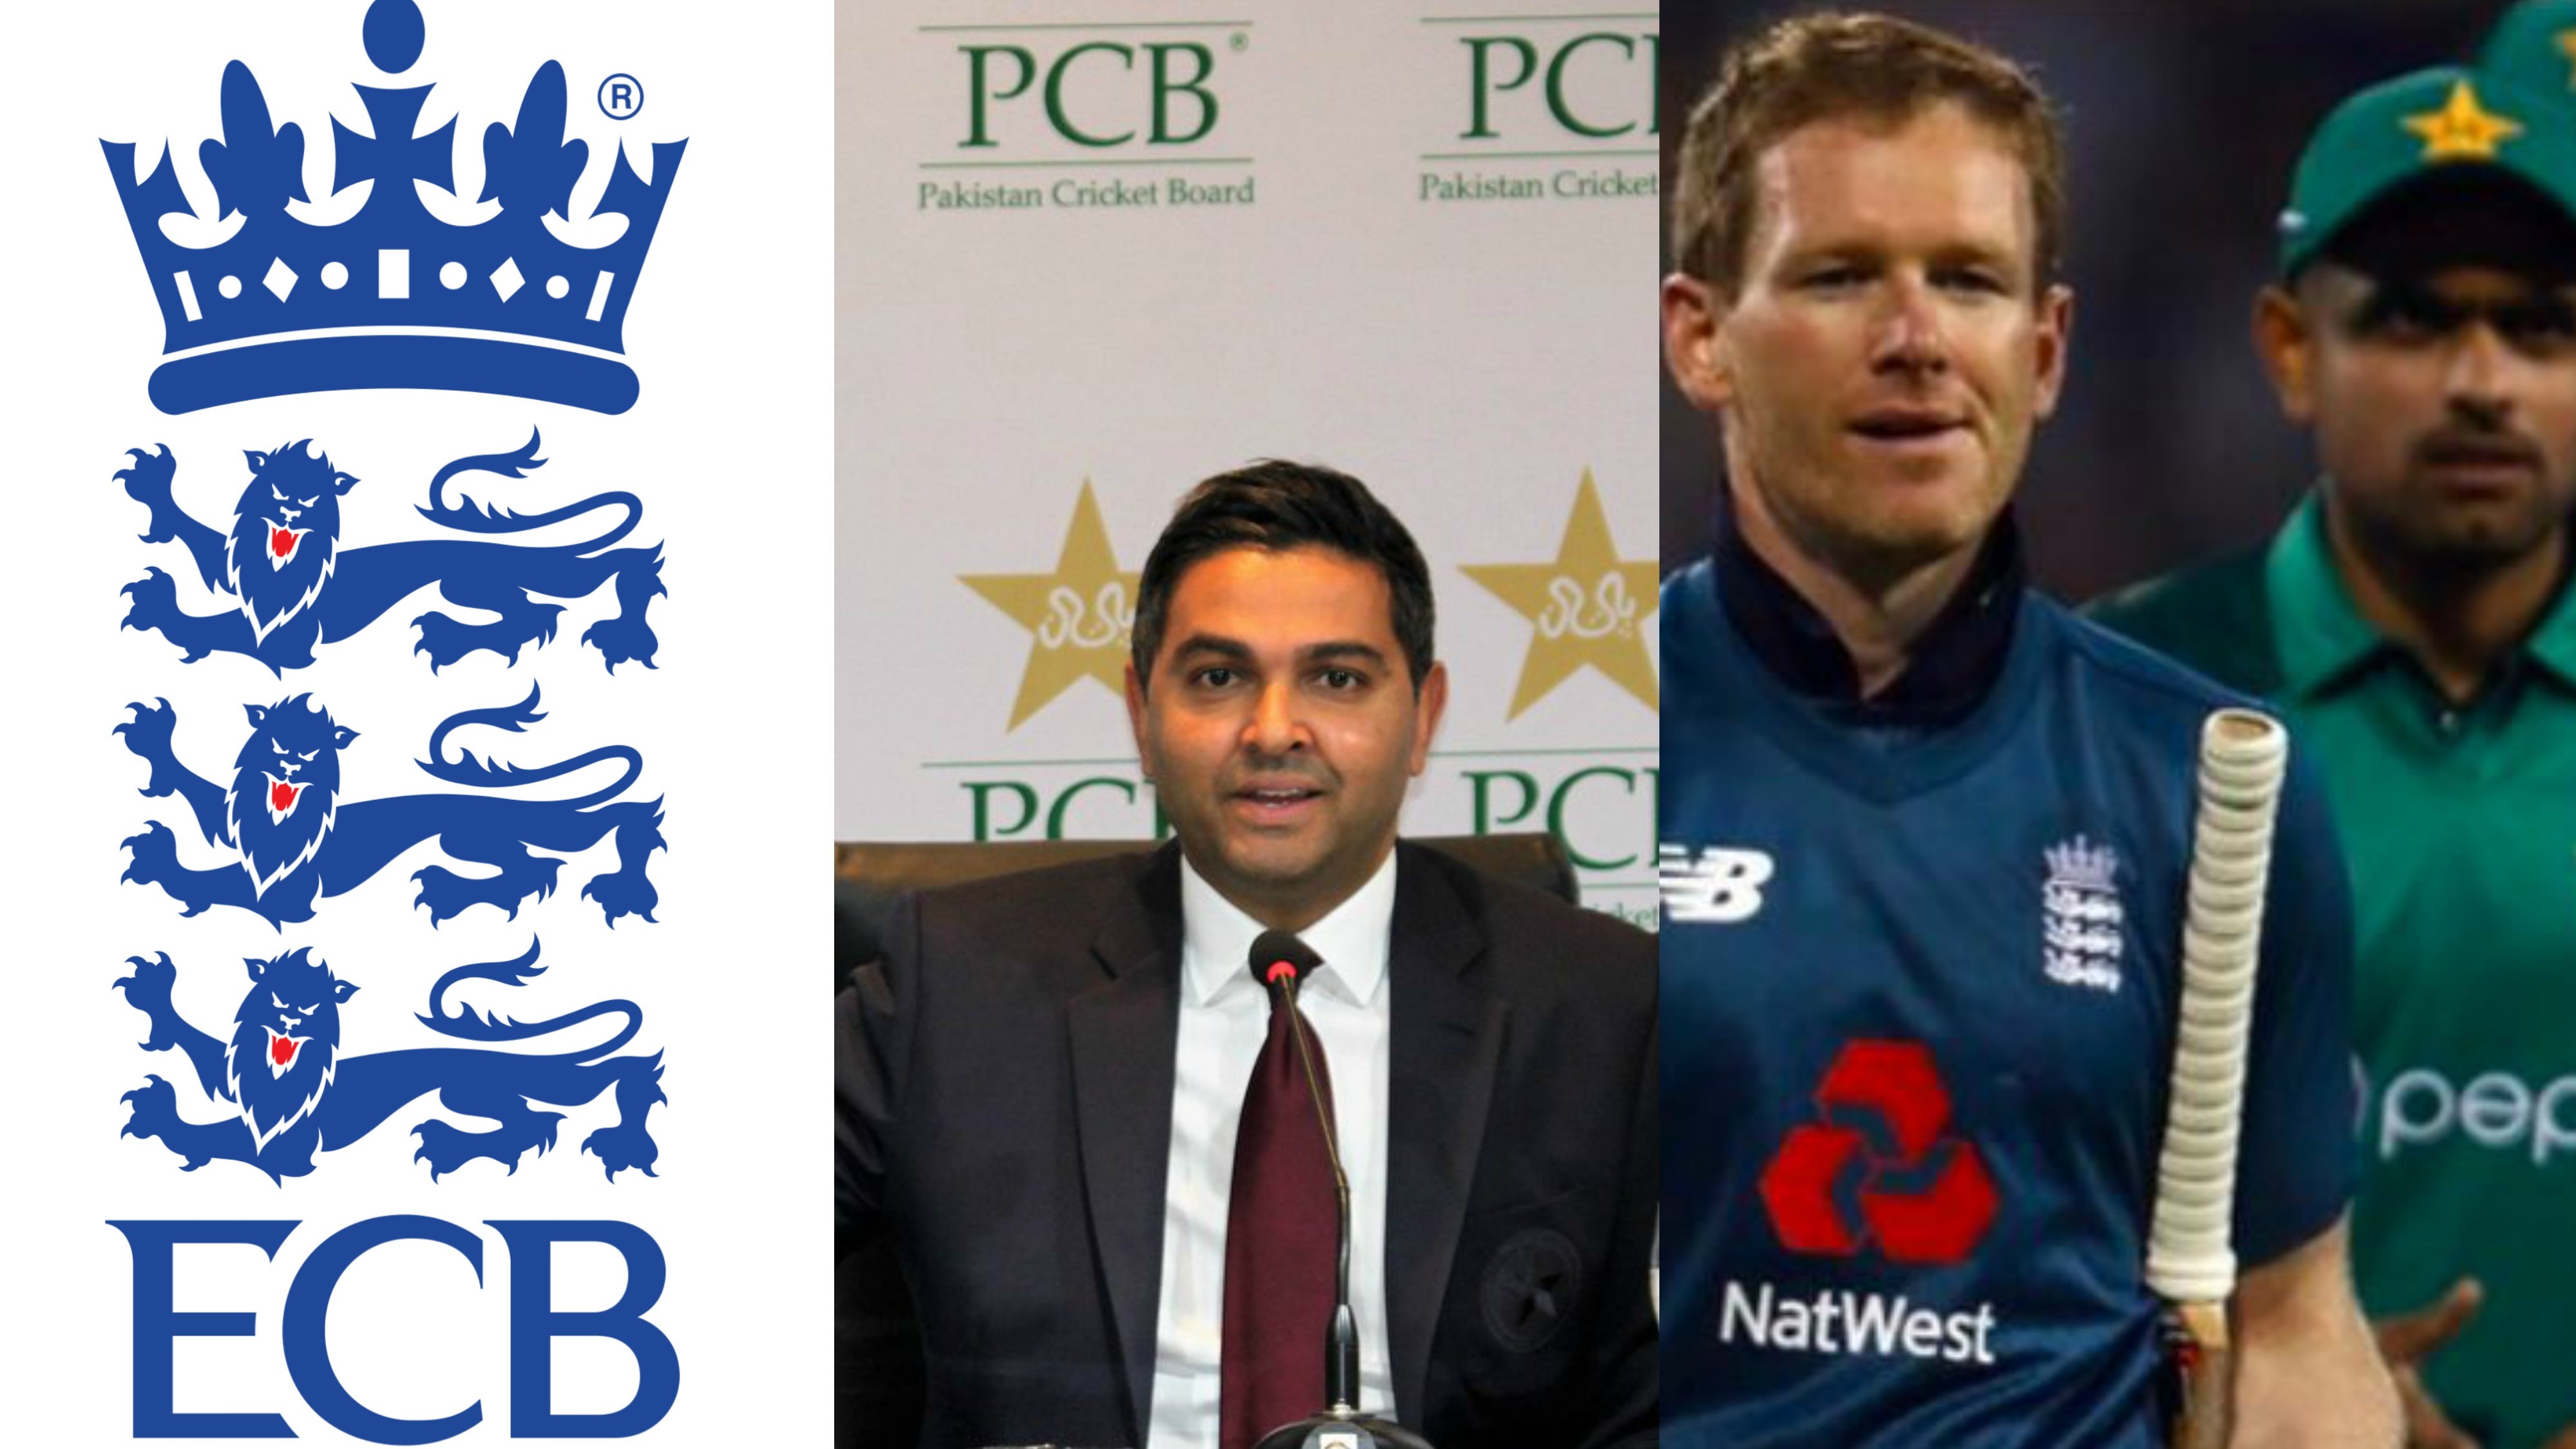 ENG v PAK 2020: PCB CEO Wasim Khan expects England to 